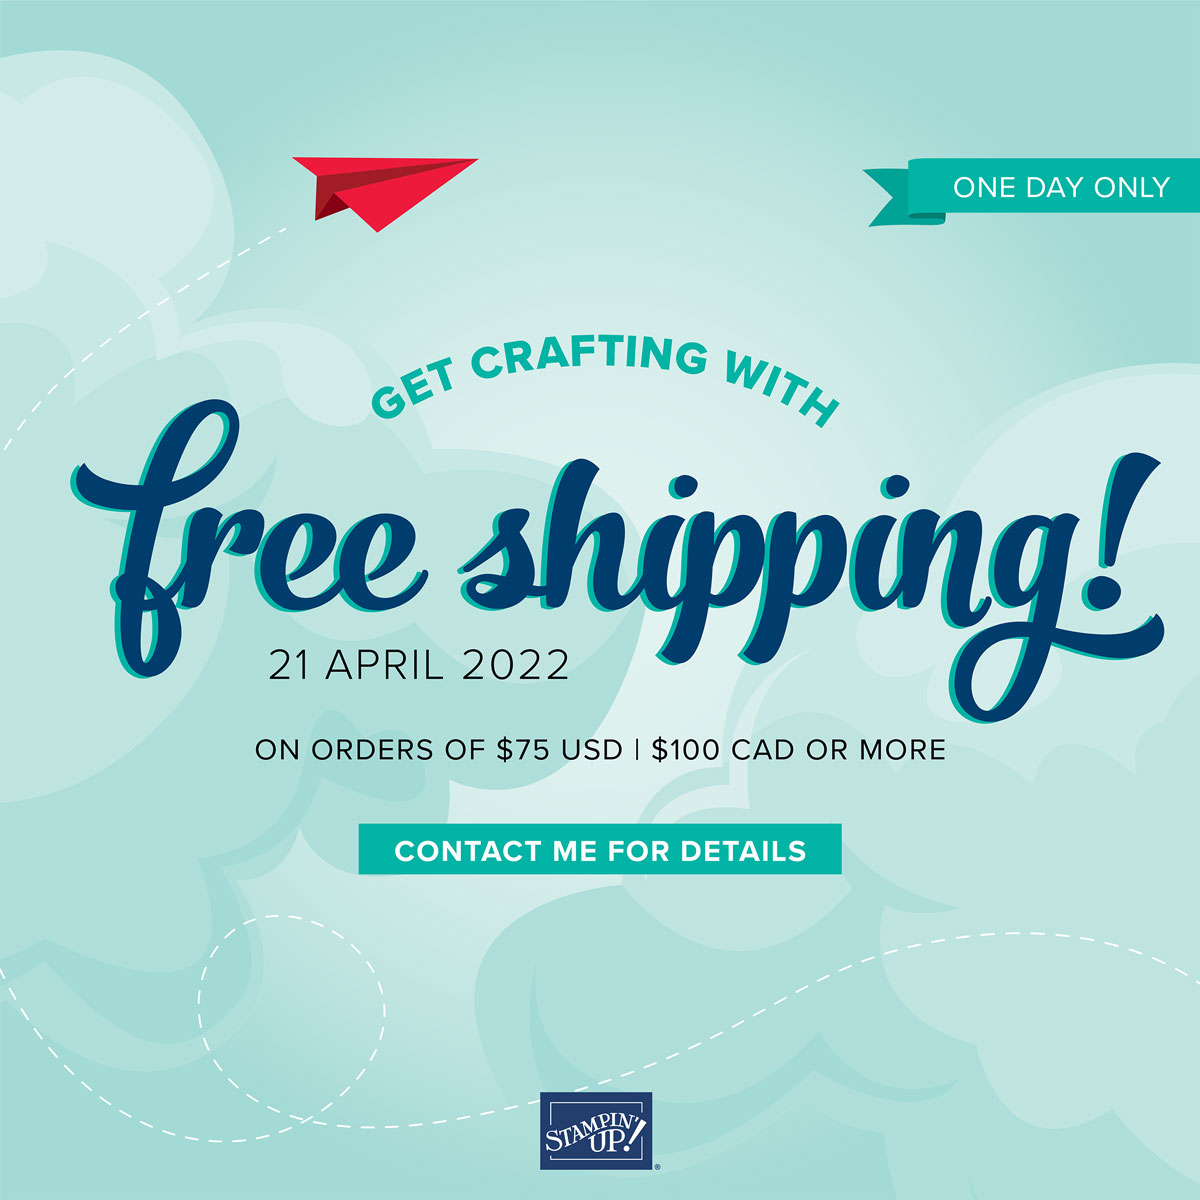 Stampin Up Free Shipping at Wild West Paper Arts